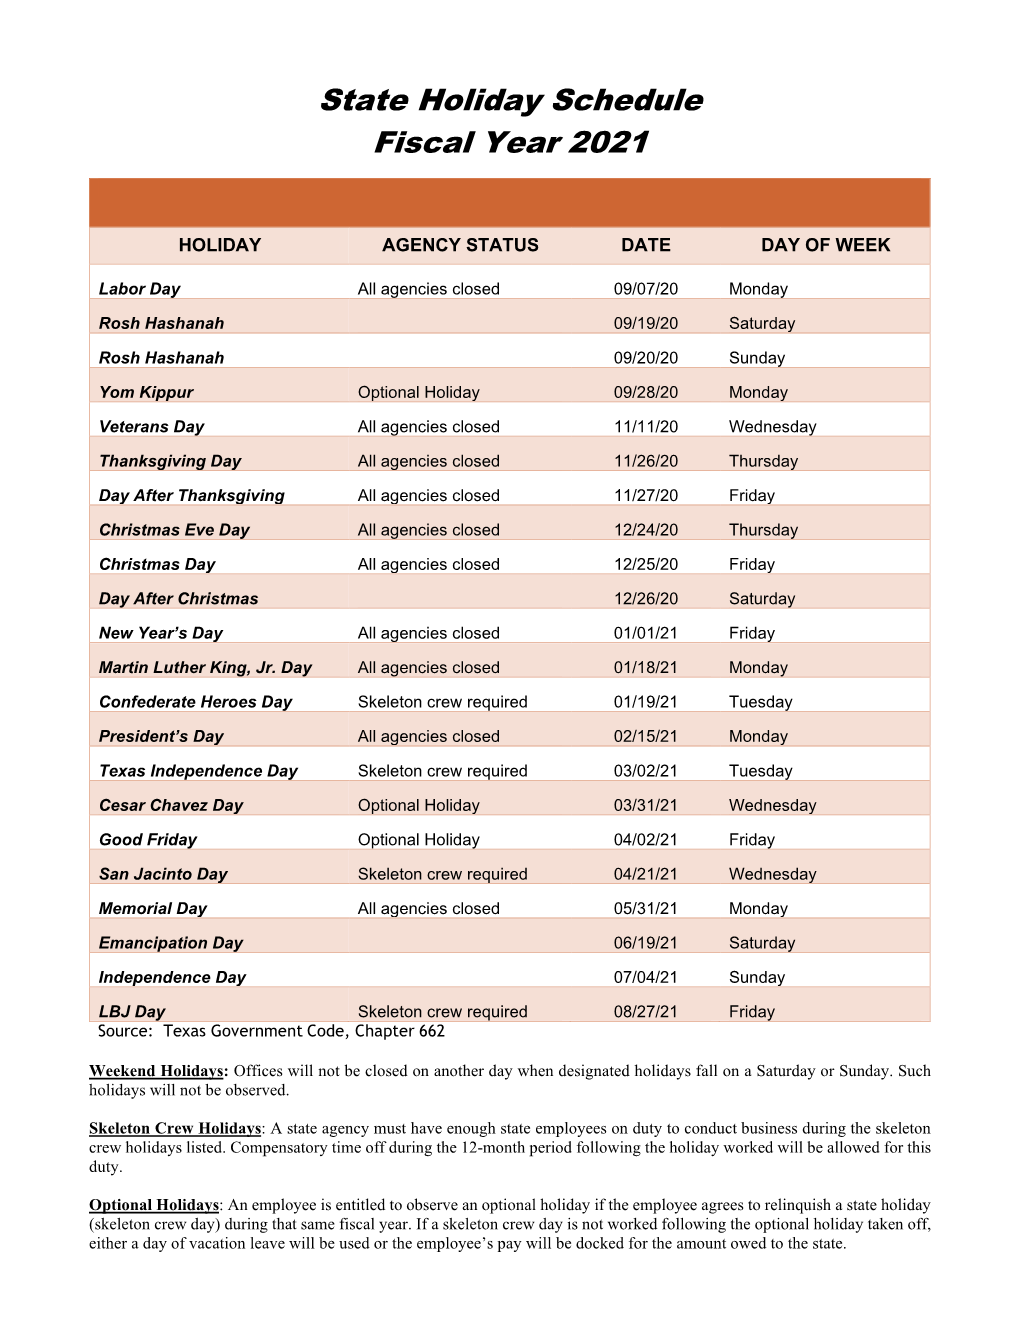 State Holiday Schedule Fiscal Year 2021